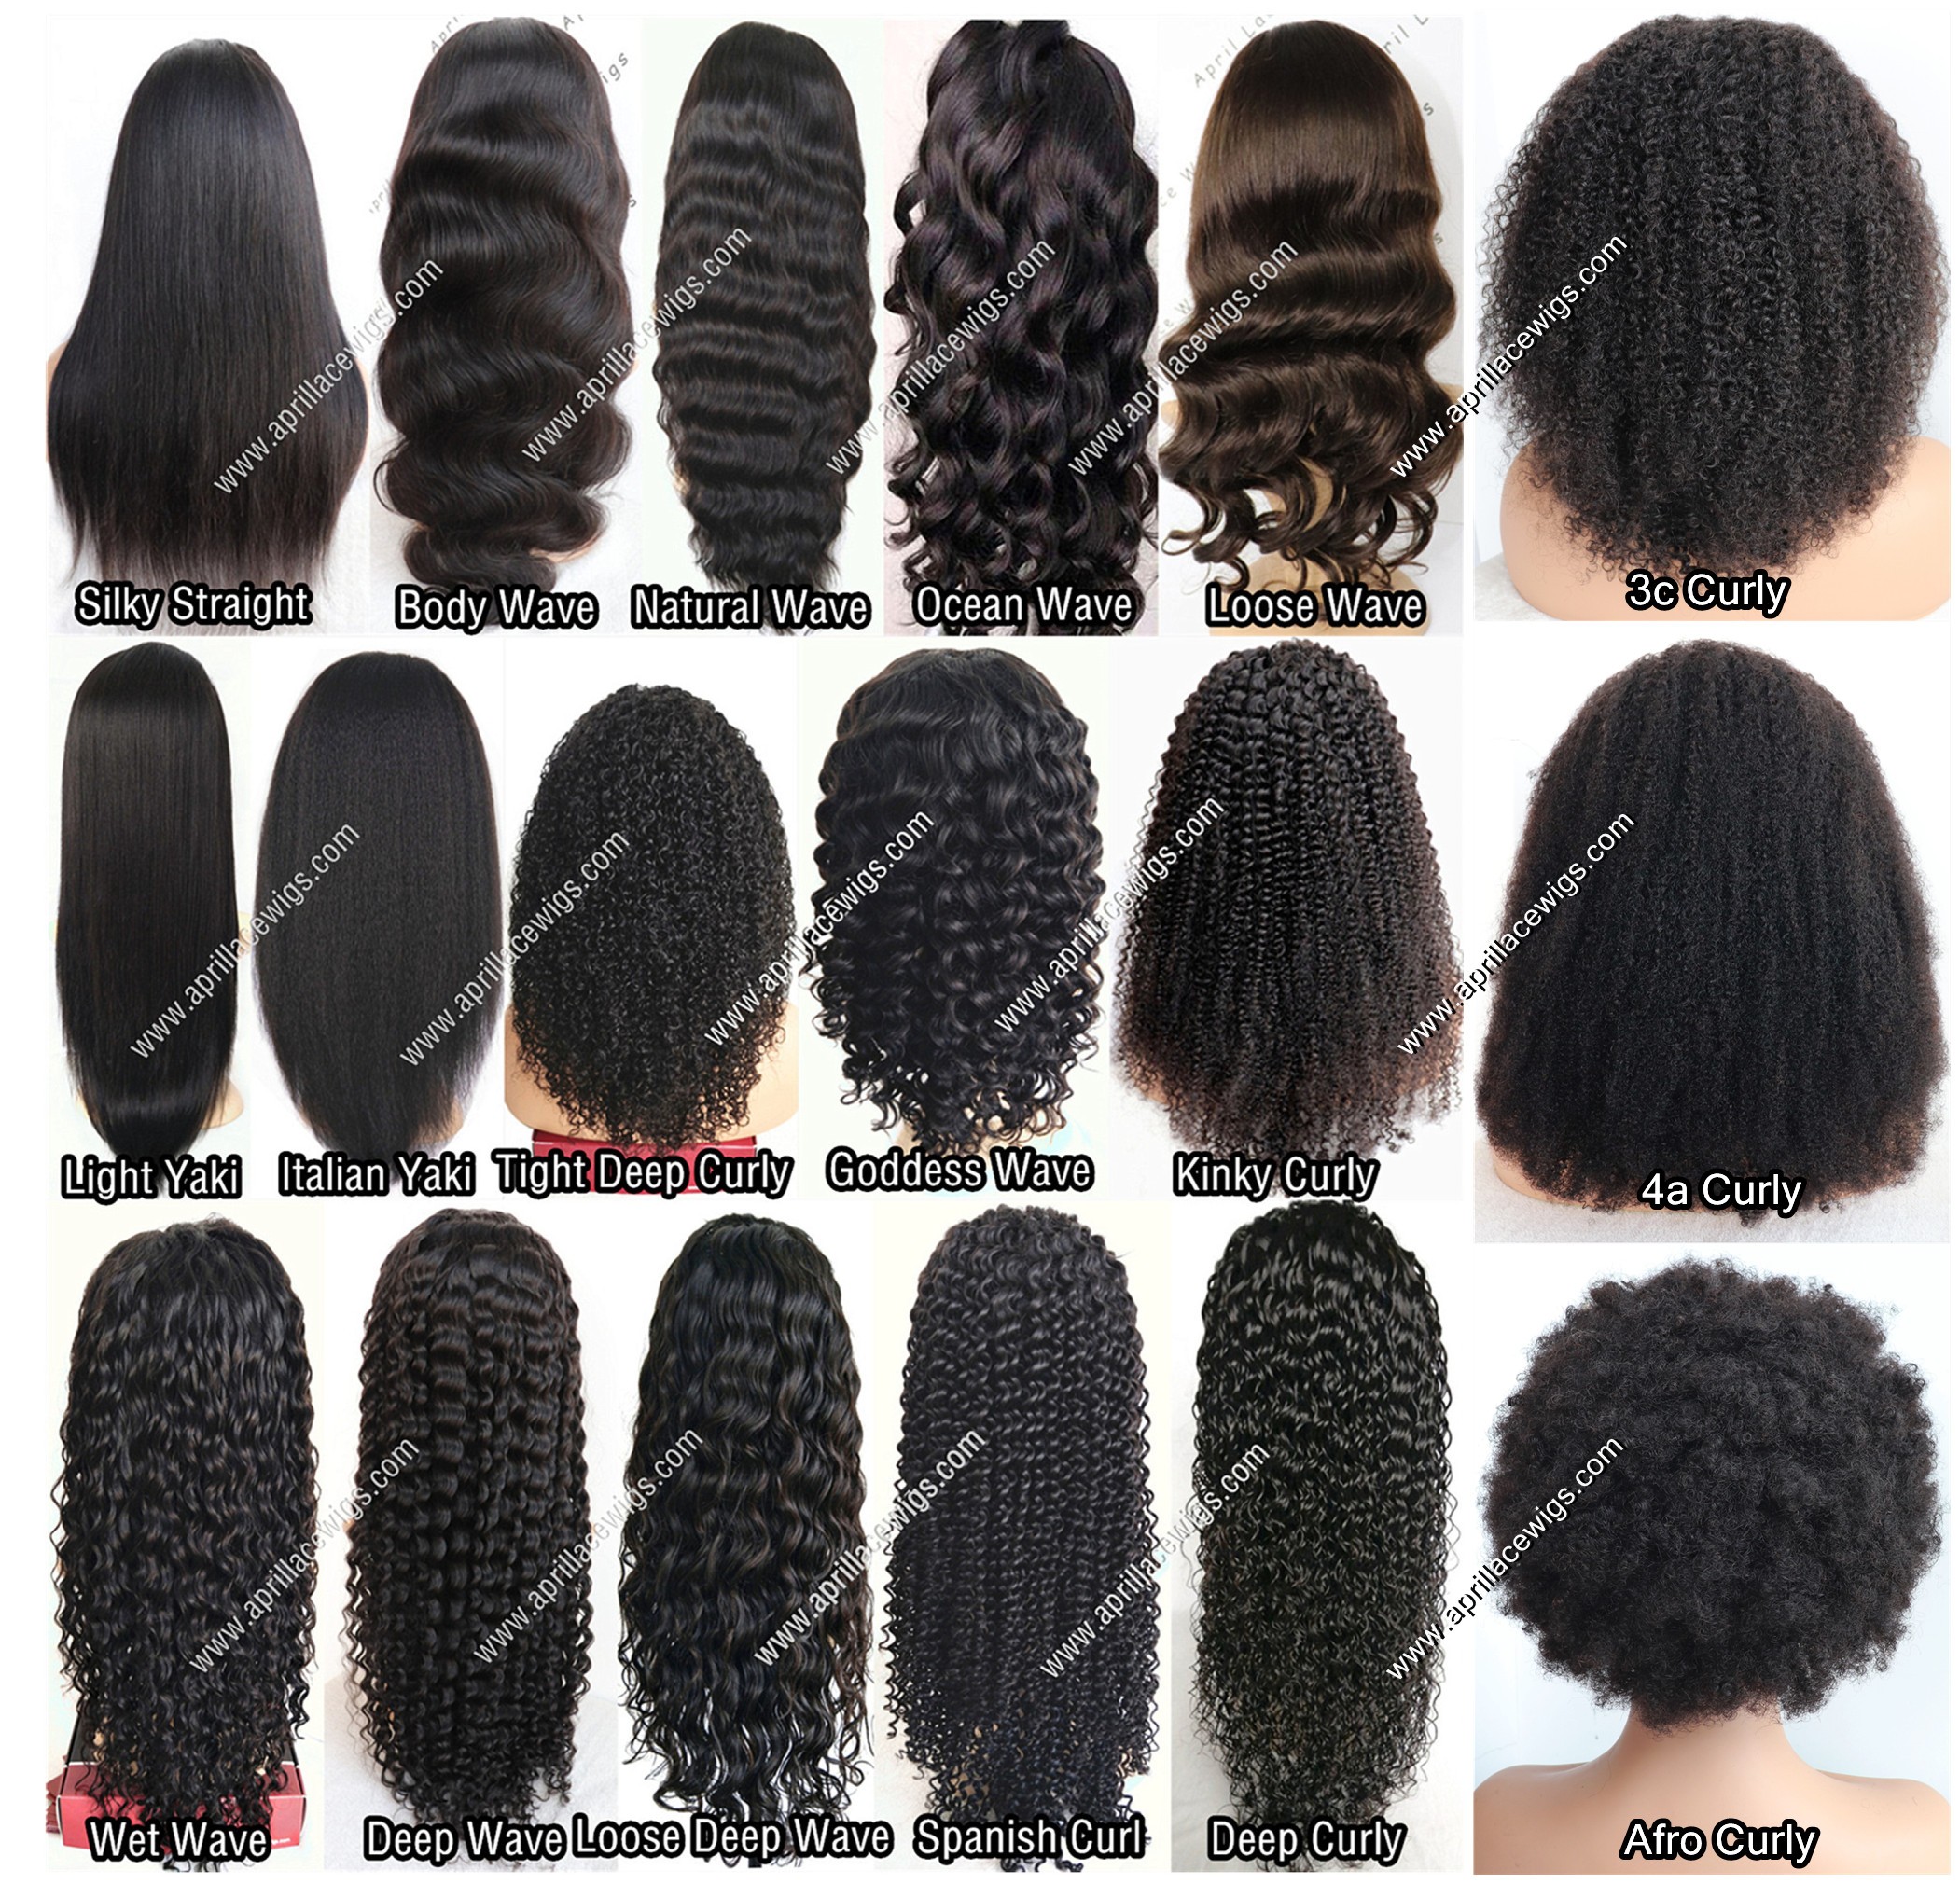 hair texture chart hd lace front wig thin lace